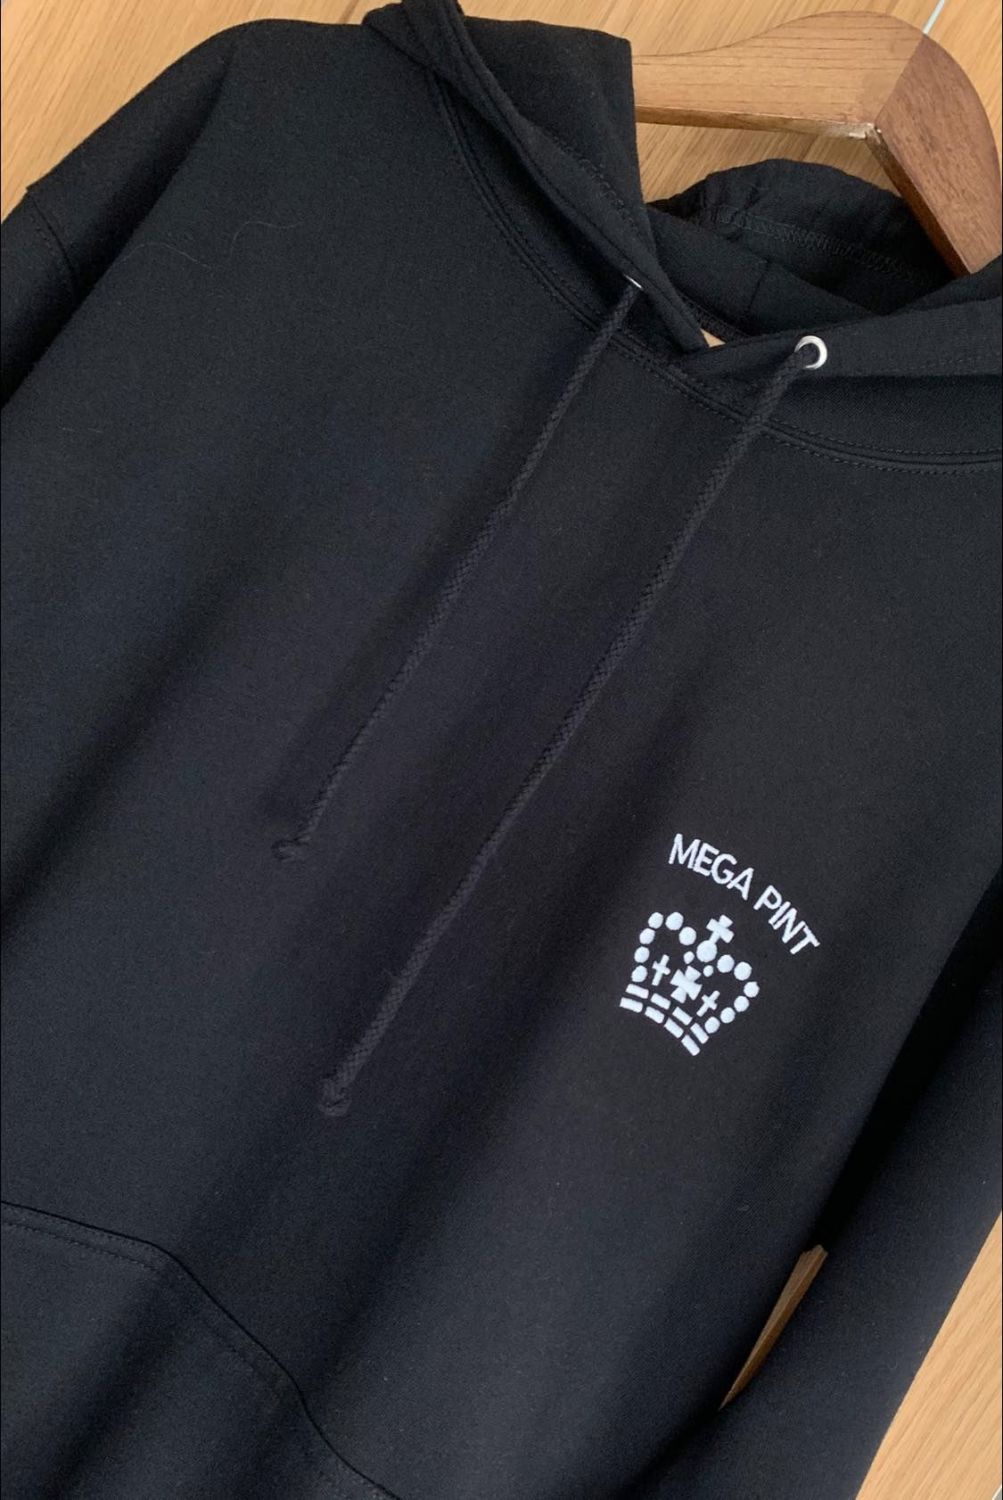 Megapint Embroidered Black Hoody